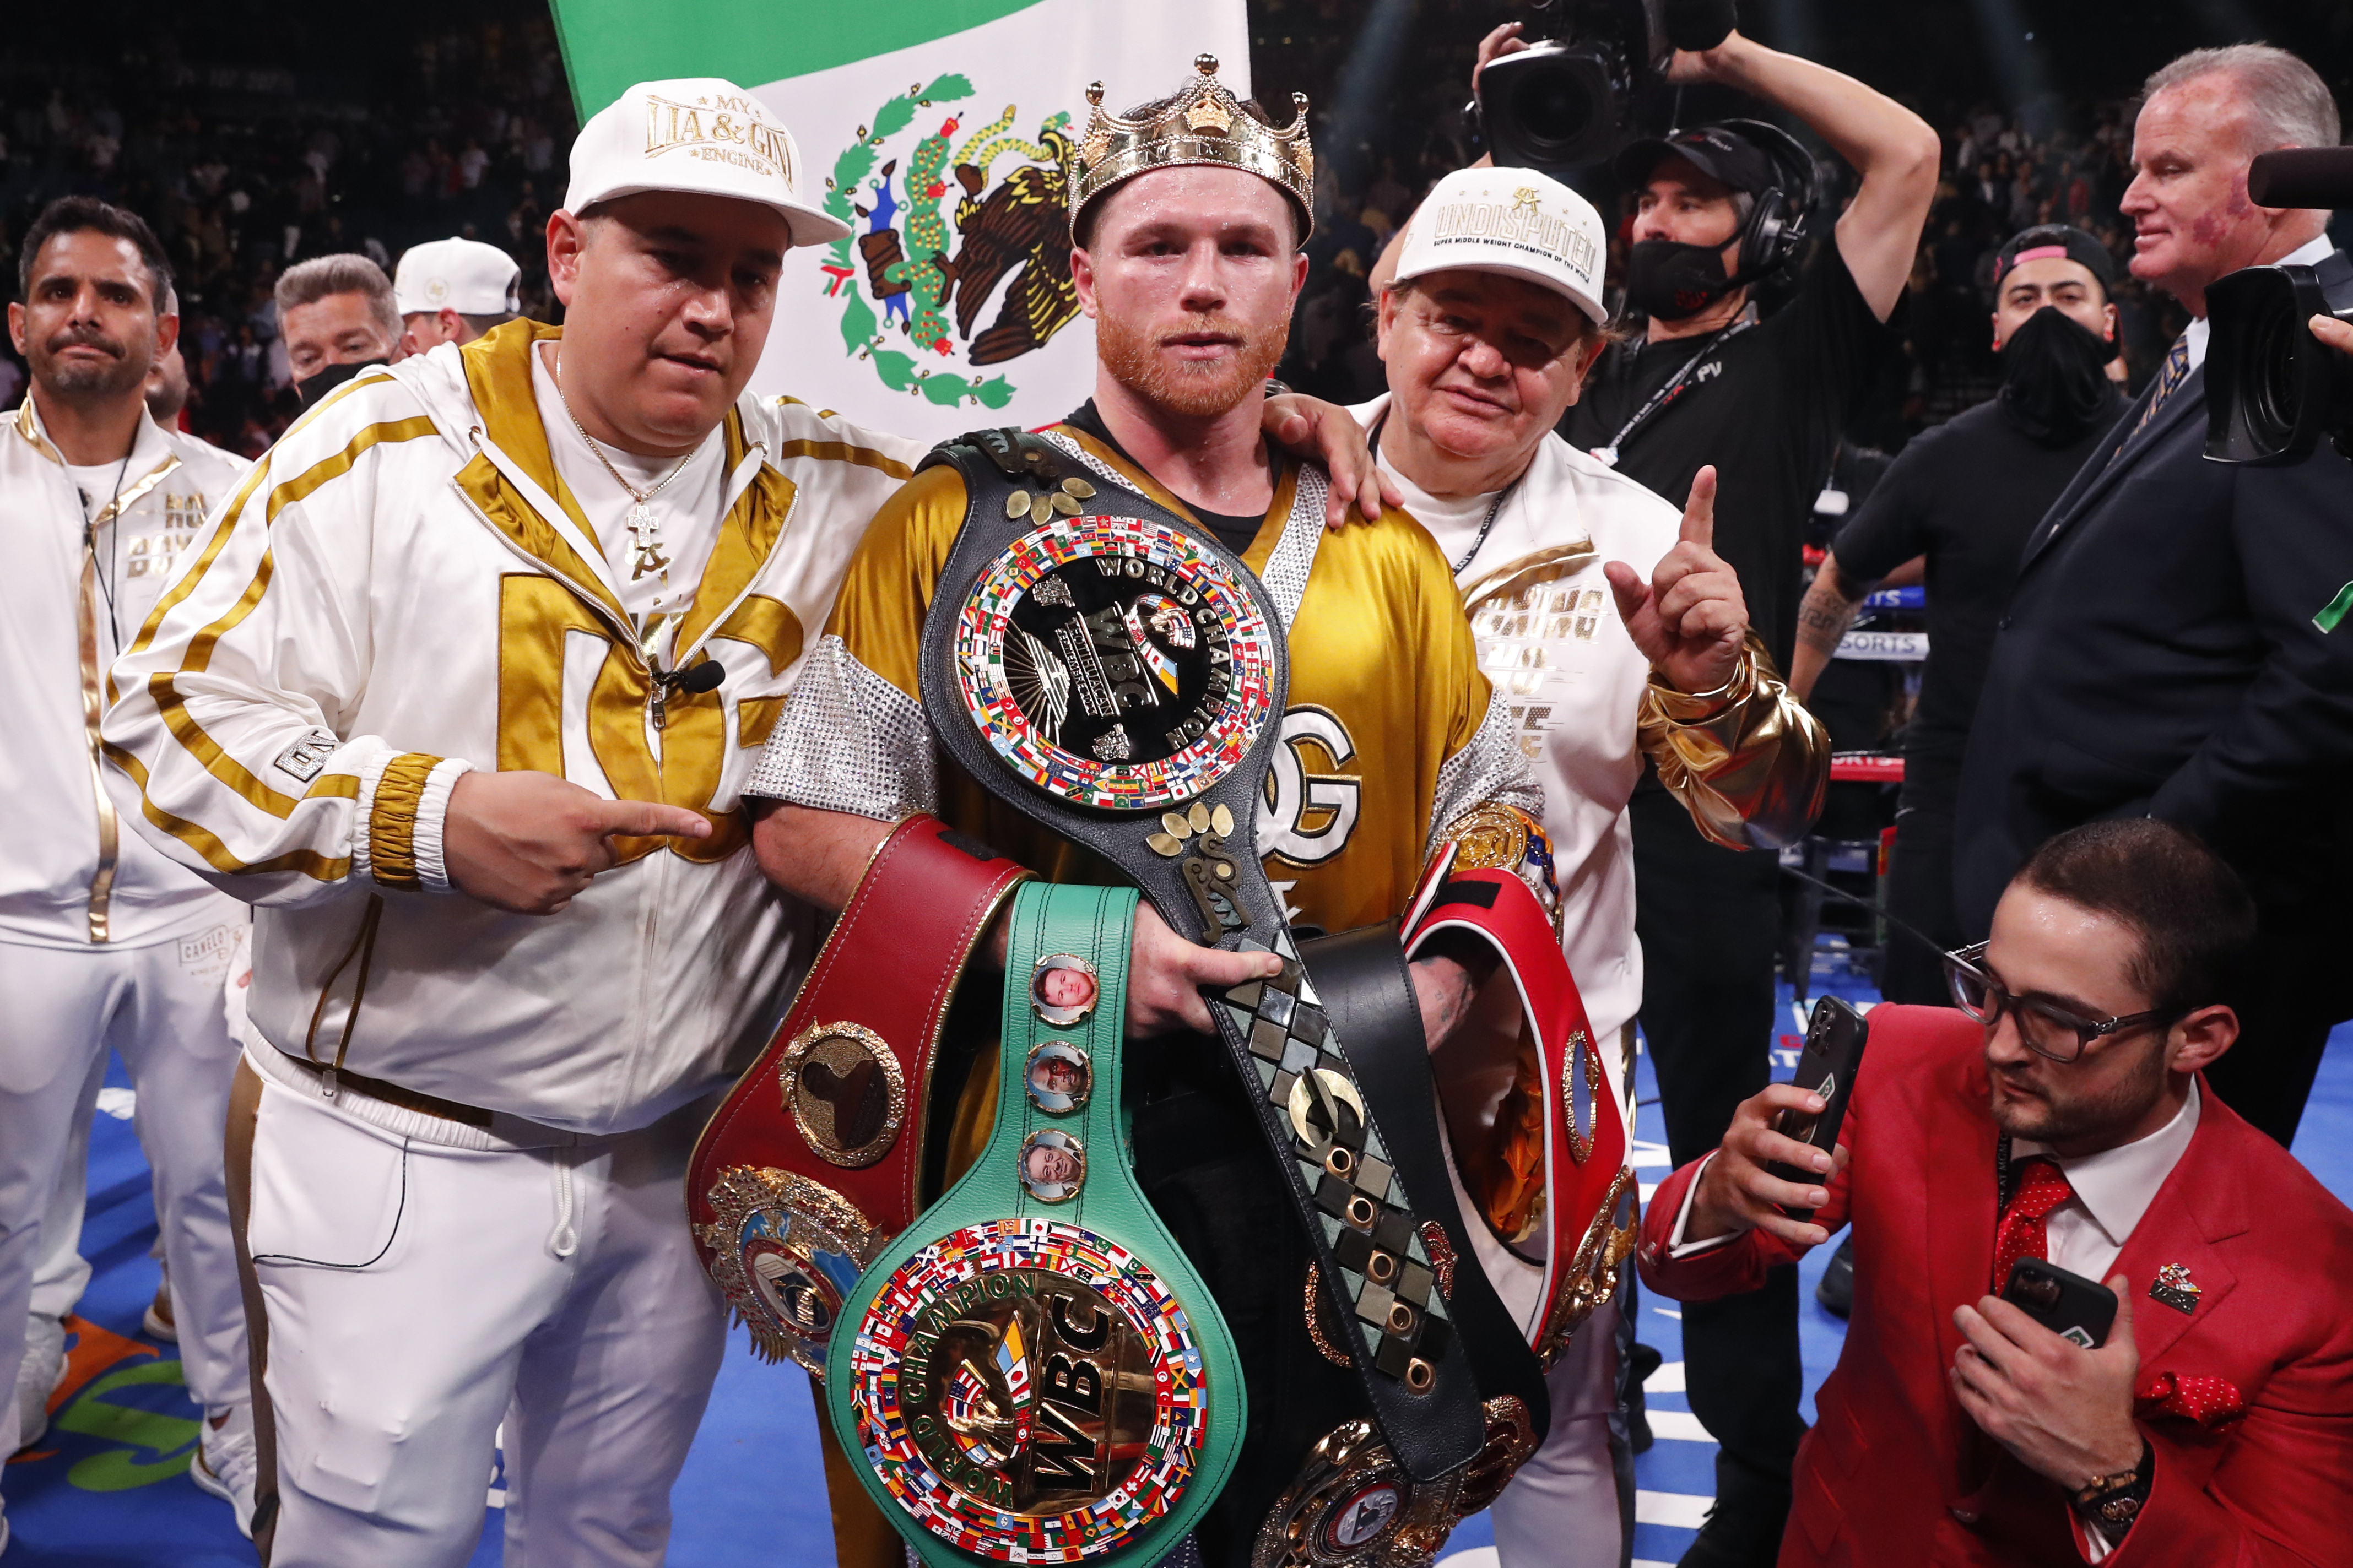 Canelo shines in a unanimous decision win against Charlo